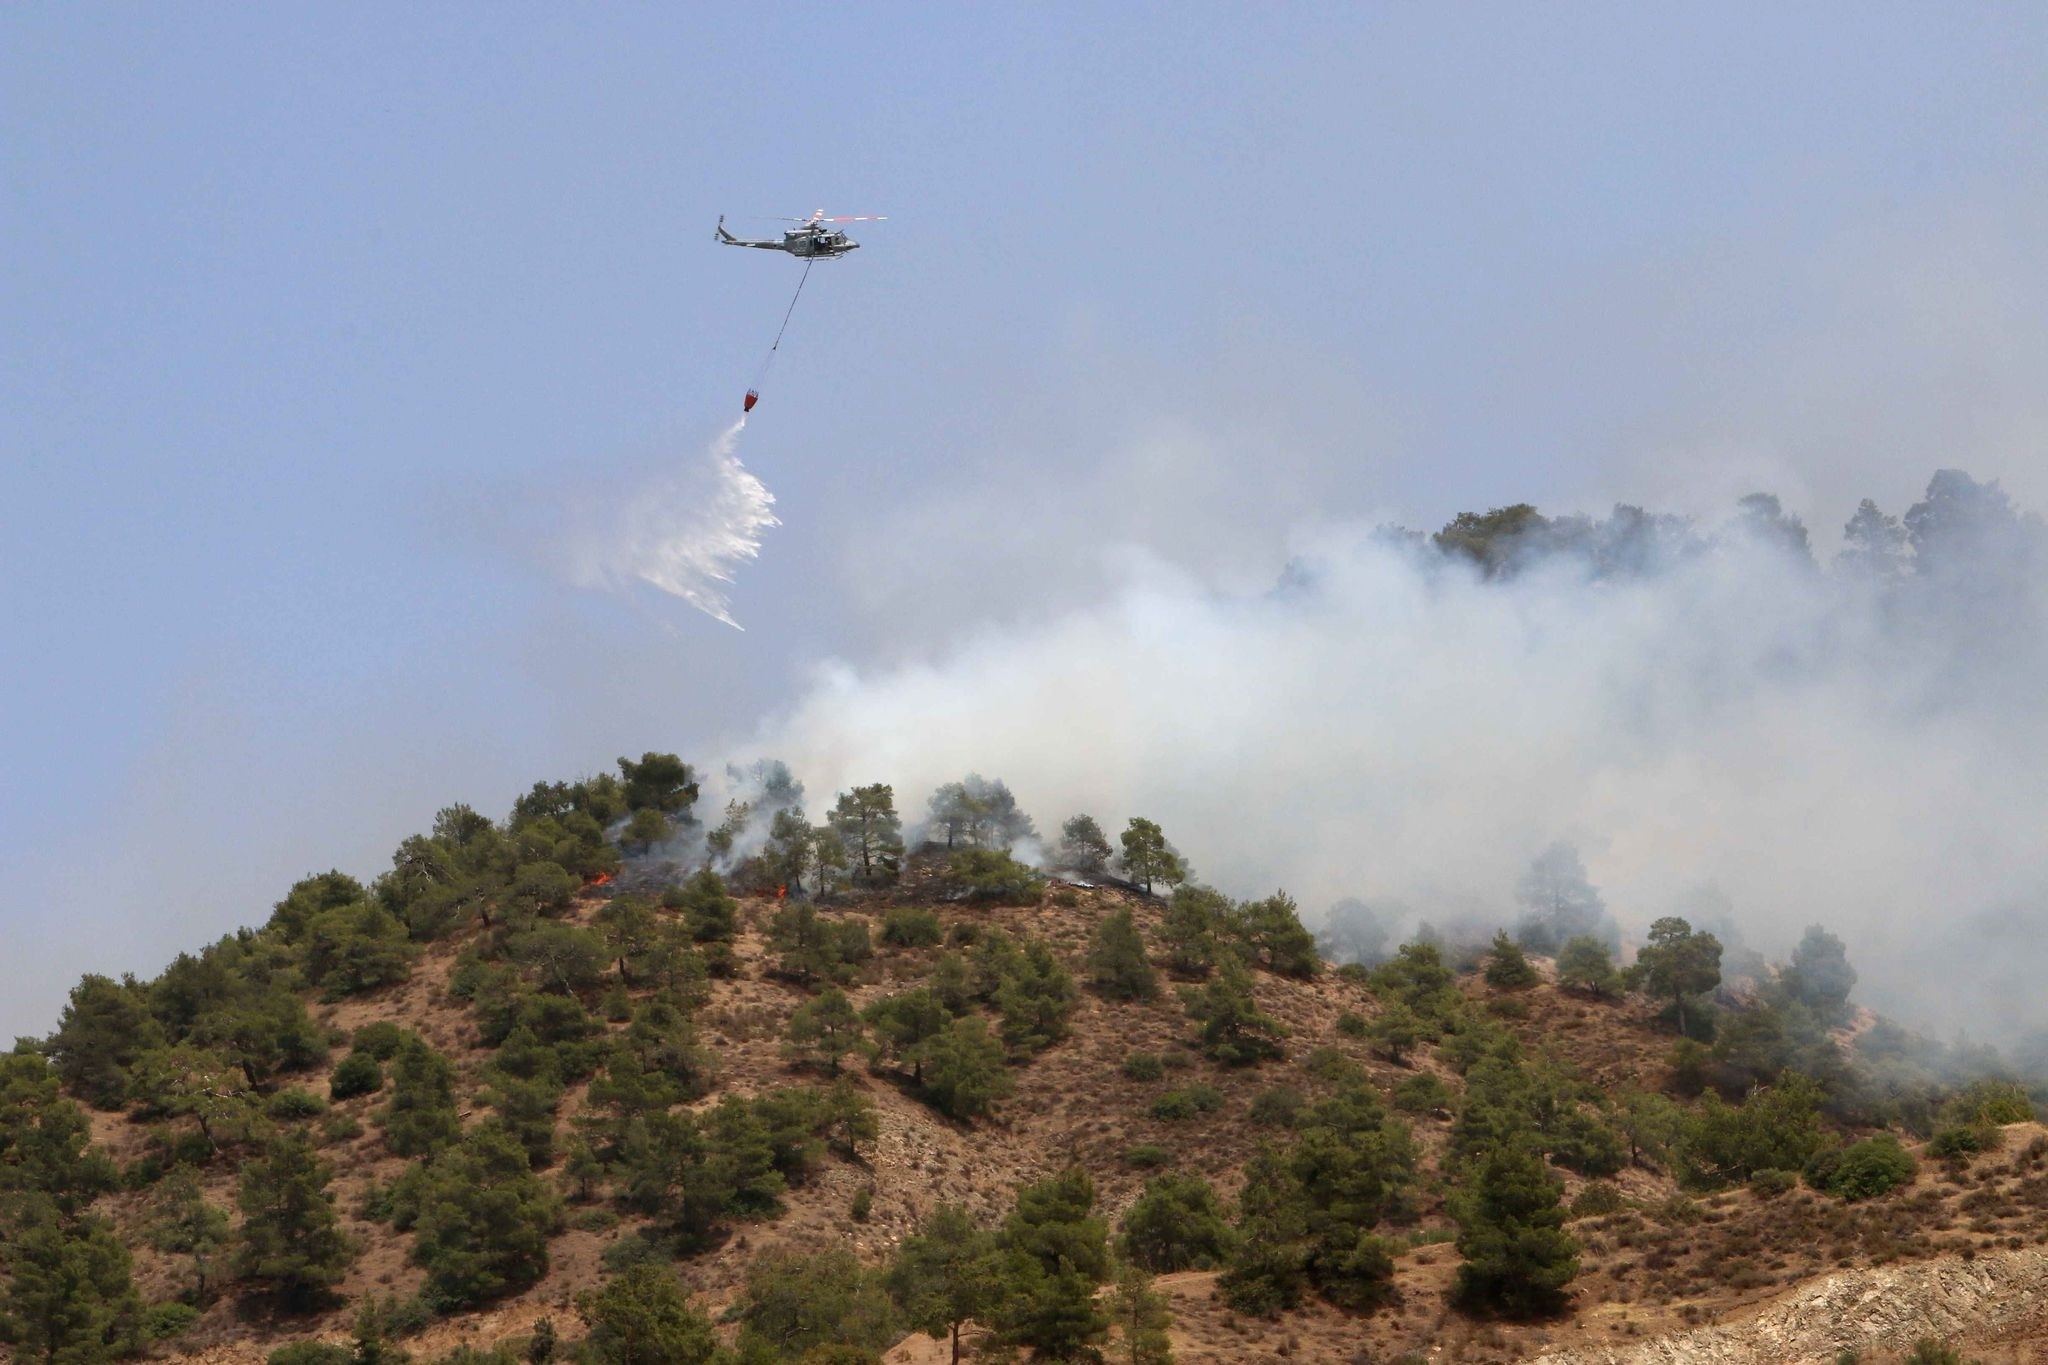 A helicopter drops water on a forest fire in the Cypriot village of Eyrixou in the Trodos mountain area on June 20, 2016. (AFP Photo)